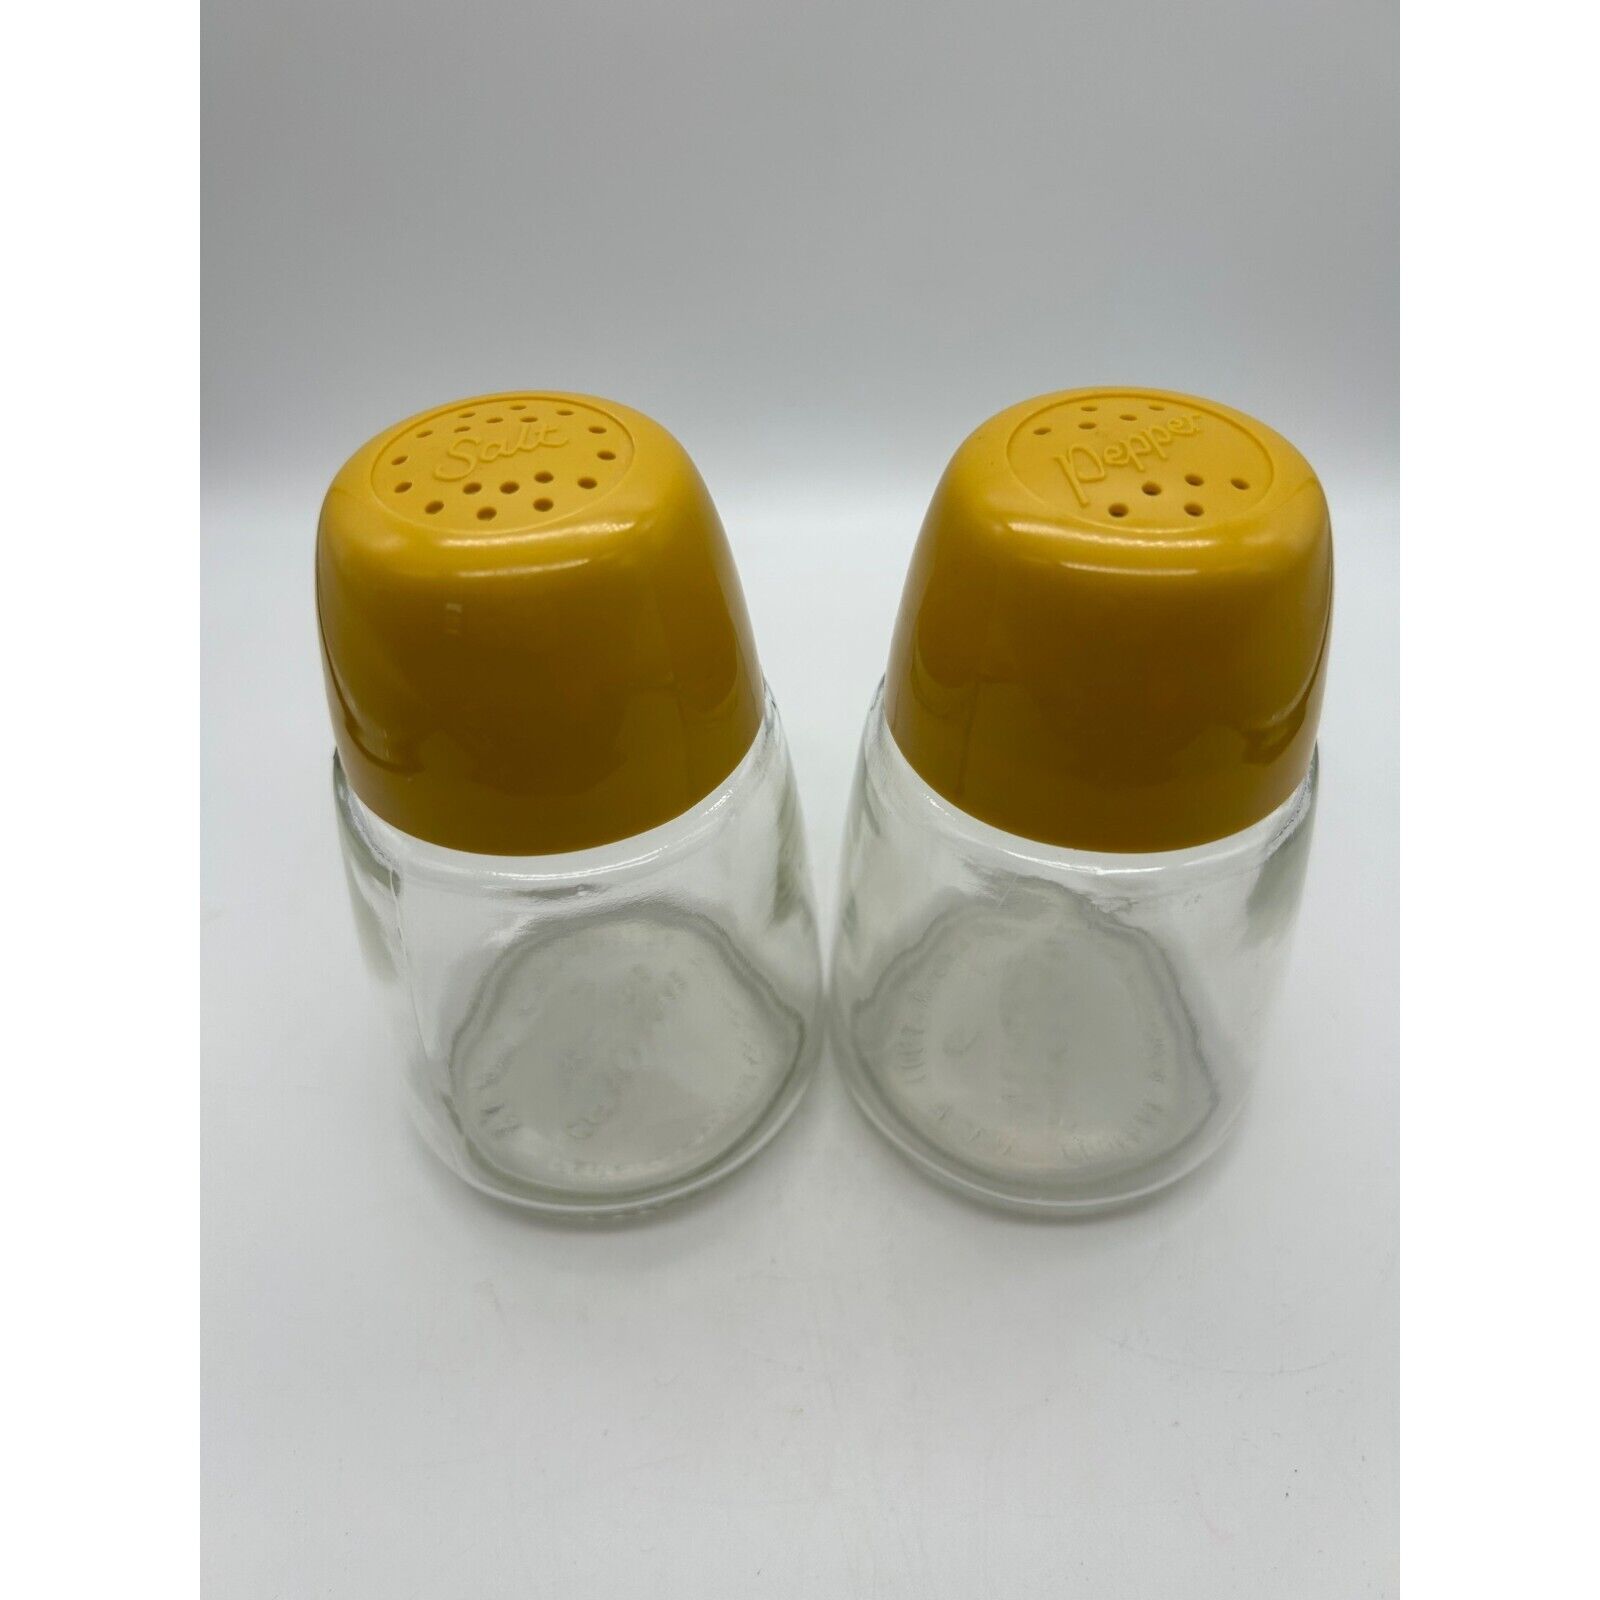 Vintage Federal Housewares Glass Salt and Pepper Shakers Yellow Lid